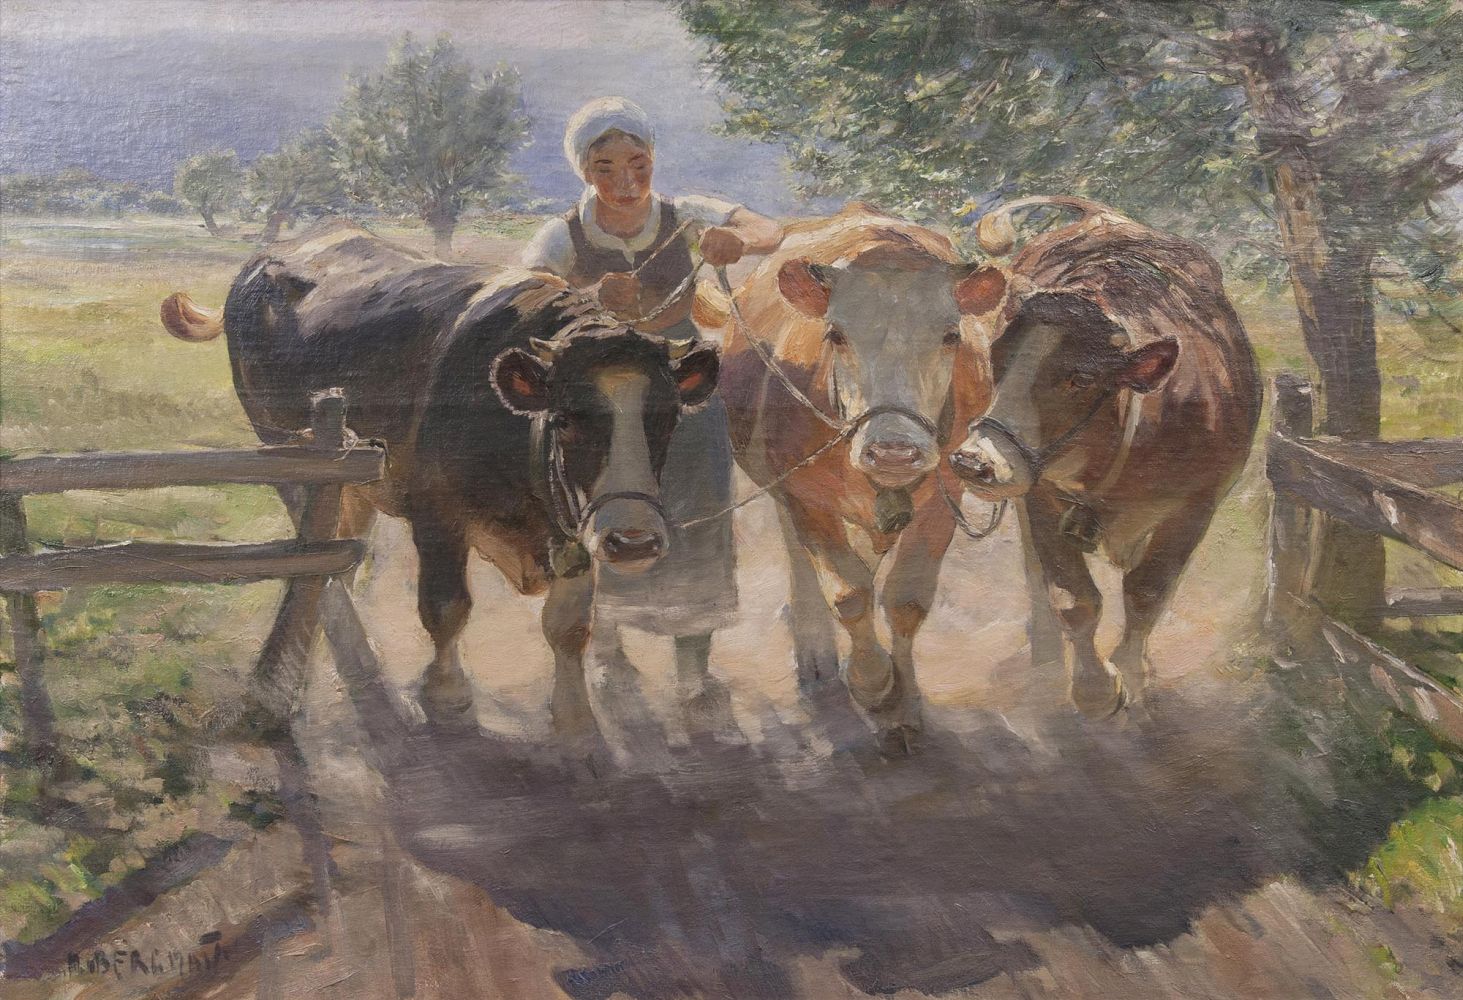 Peasant woman with cattle